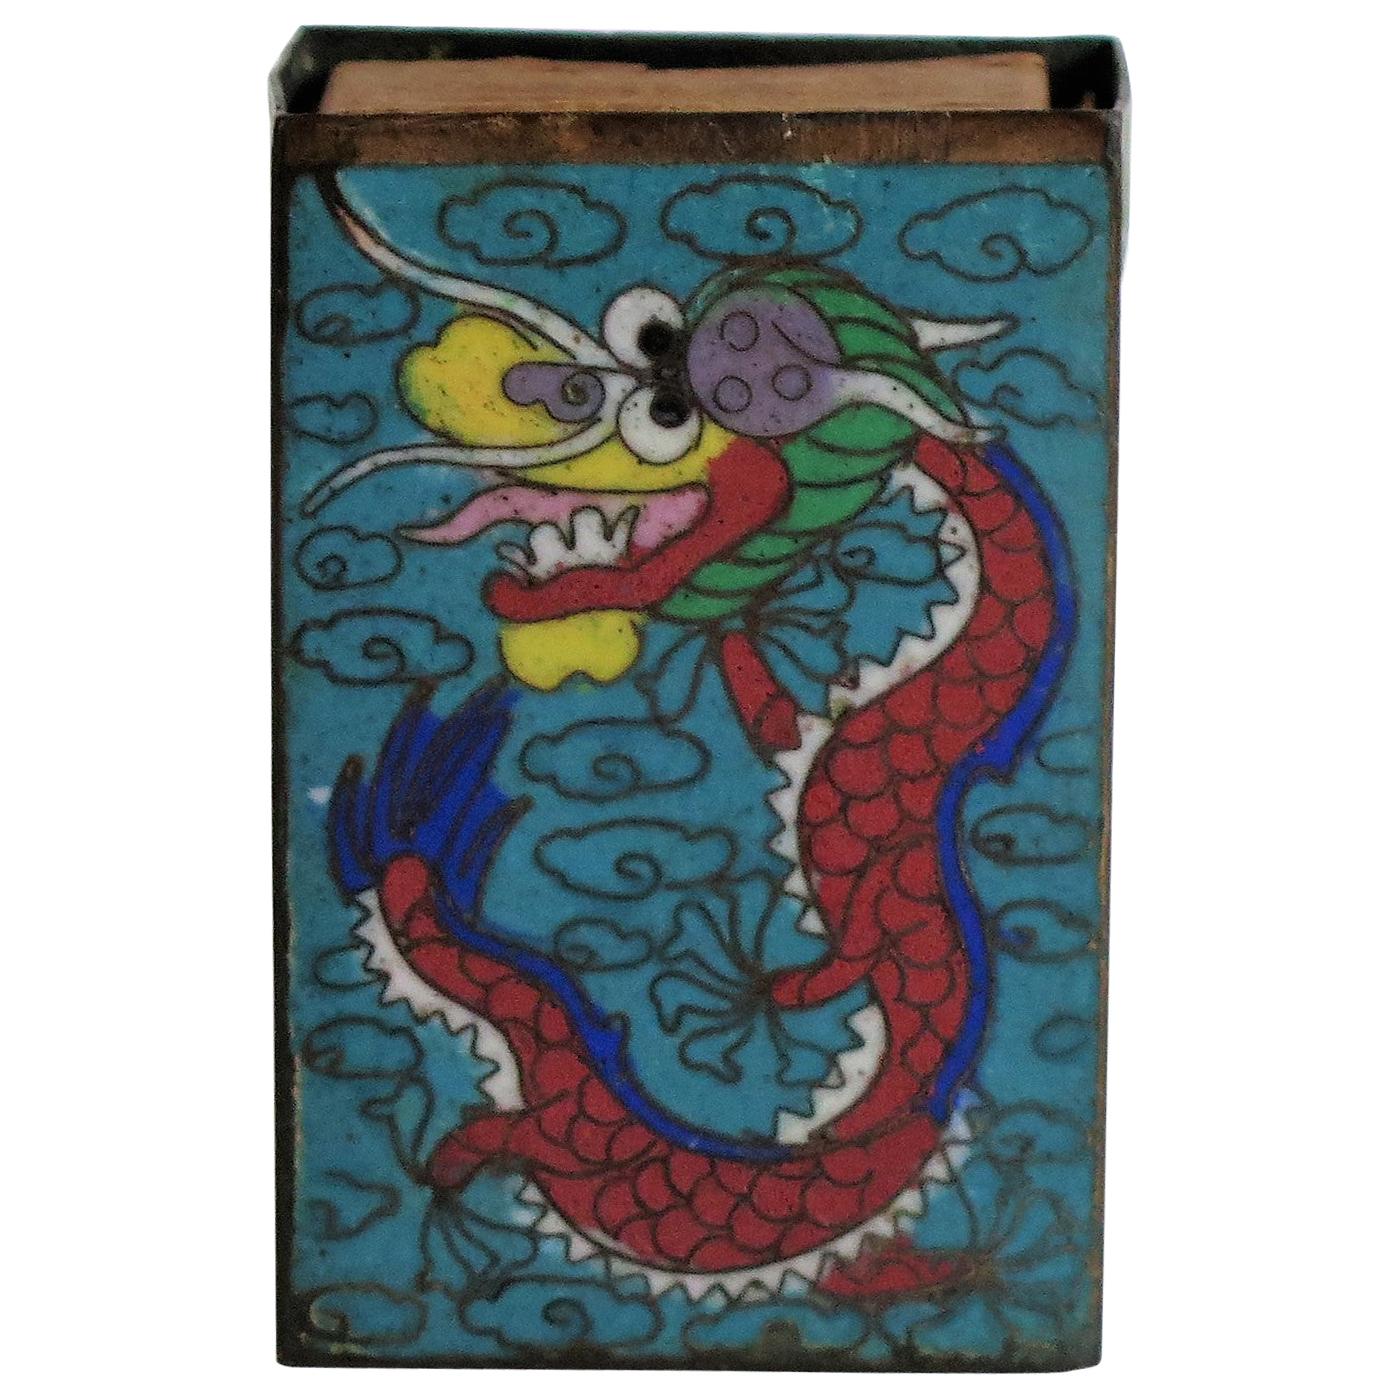 Chinese Cloisonne Vesta Match Case with Dragon and Pearl design, 19th Century